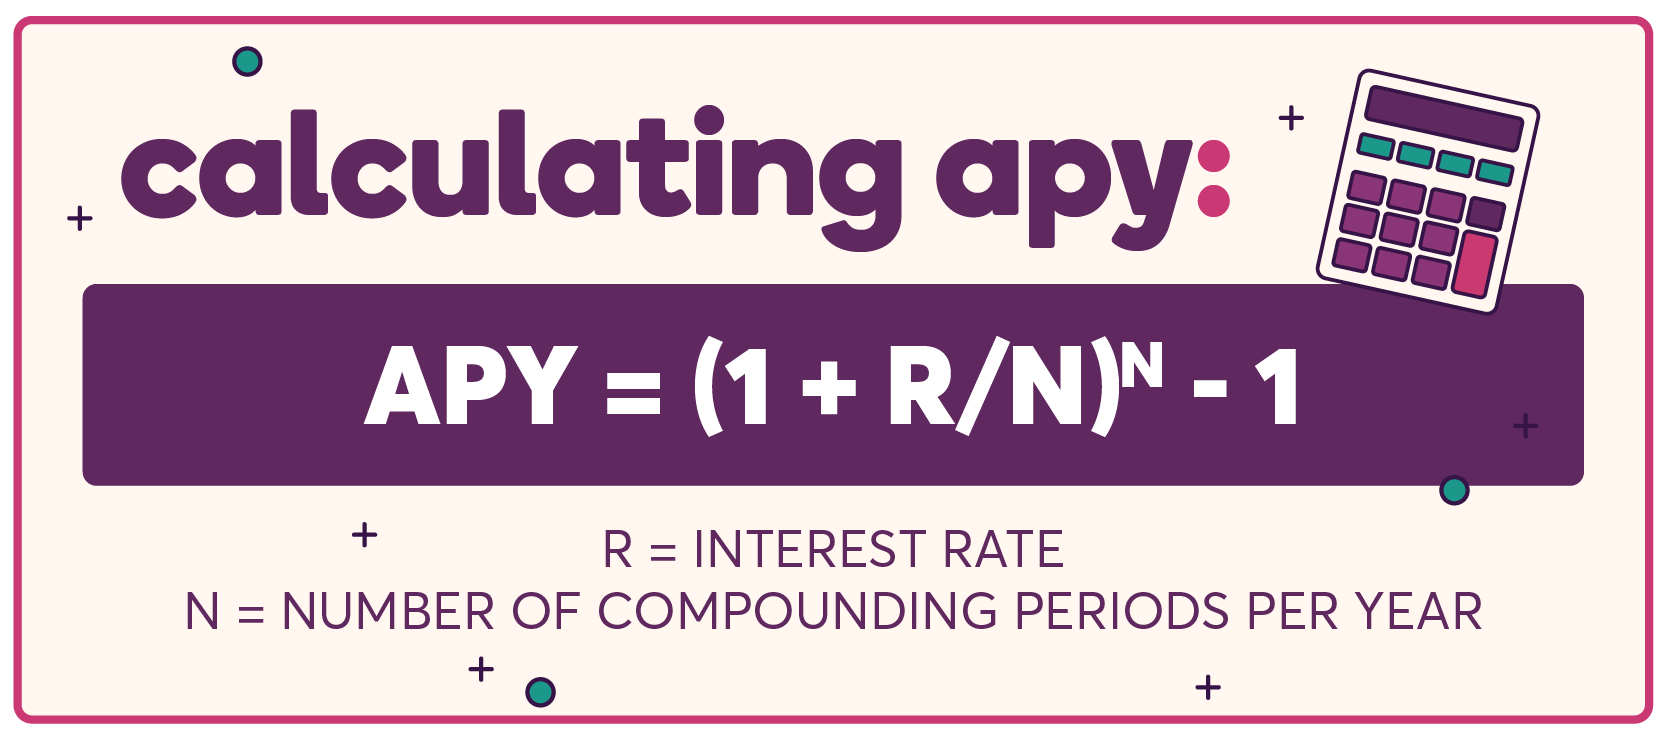 Illustration with text “calculating apy: APY = (1+R/N)N-1. R = Interest Rate. N = Number of compounding periods per year” with an illustration of a calculator